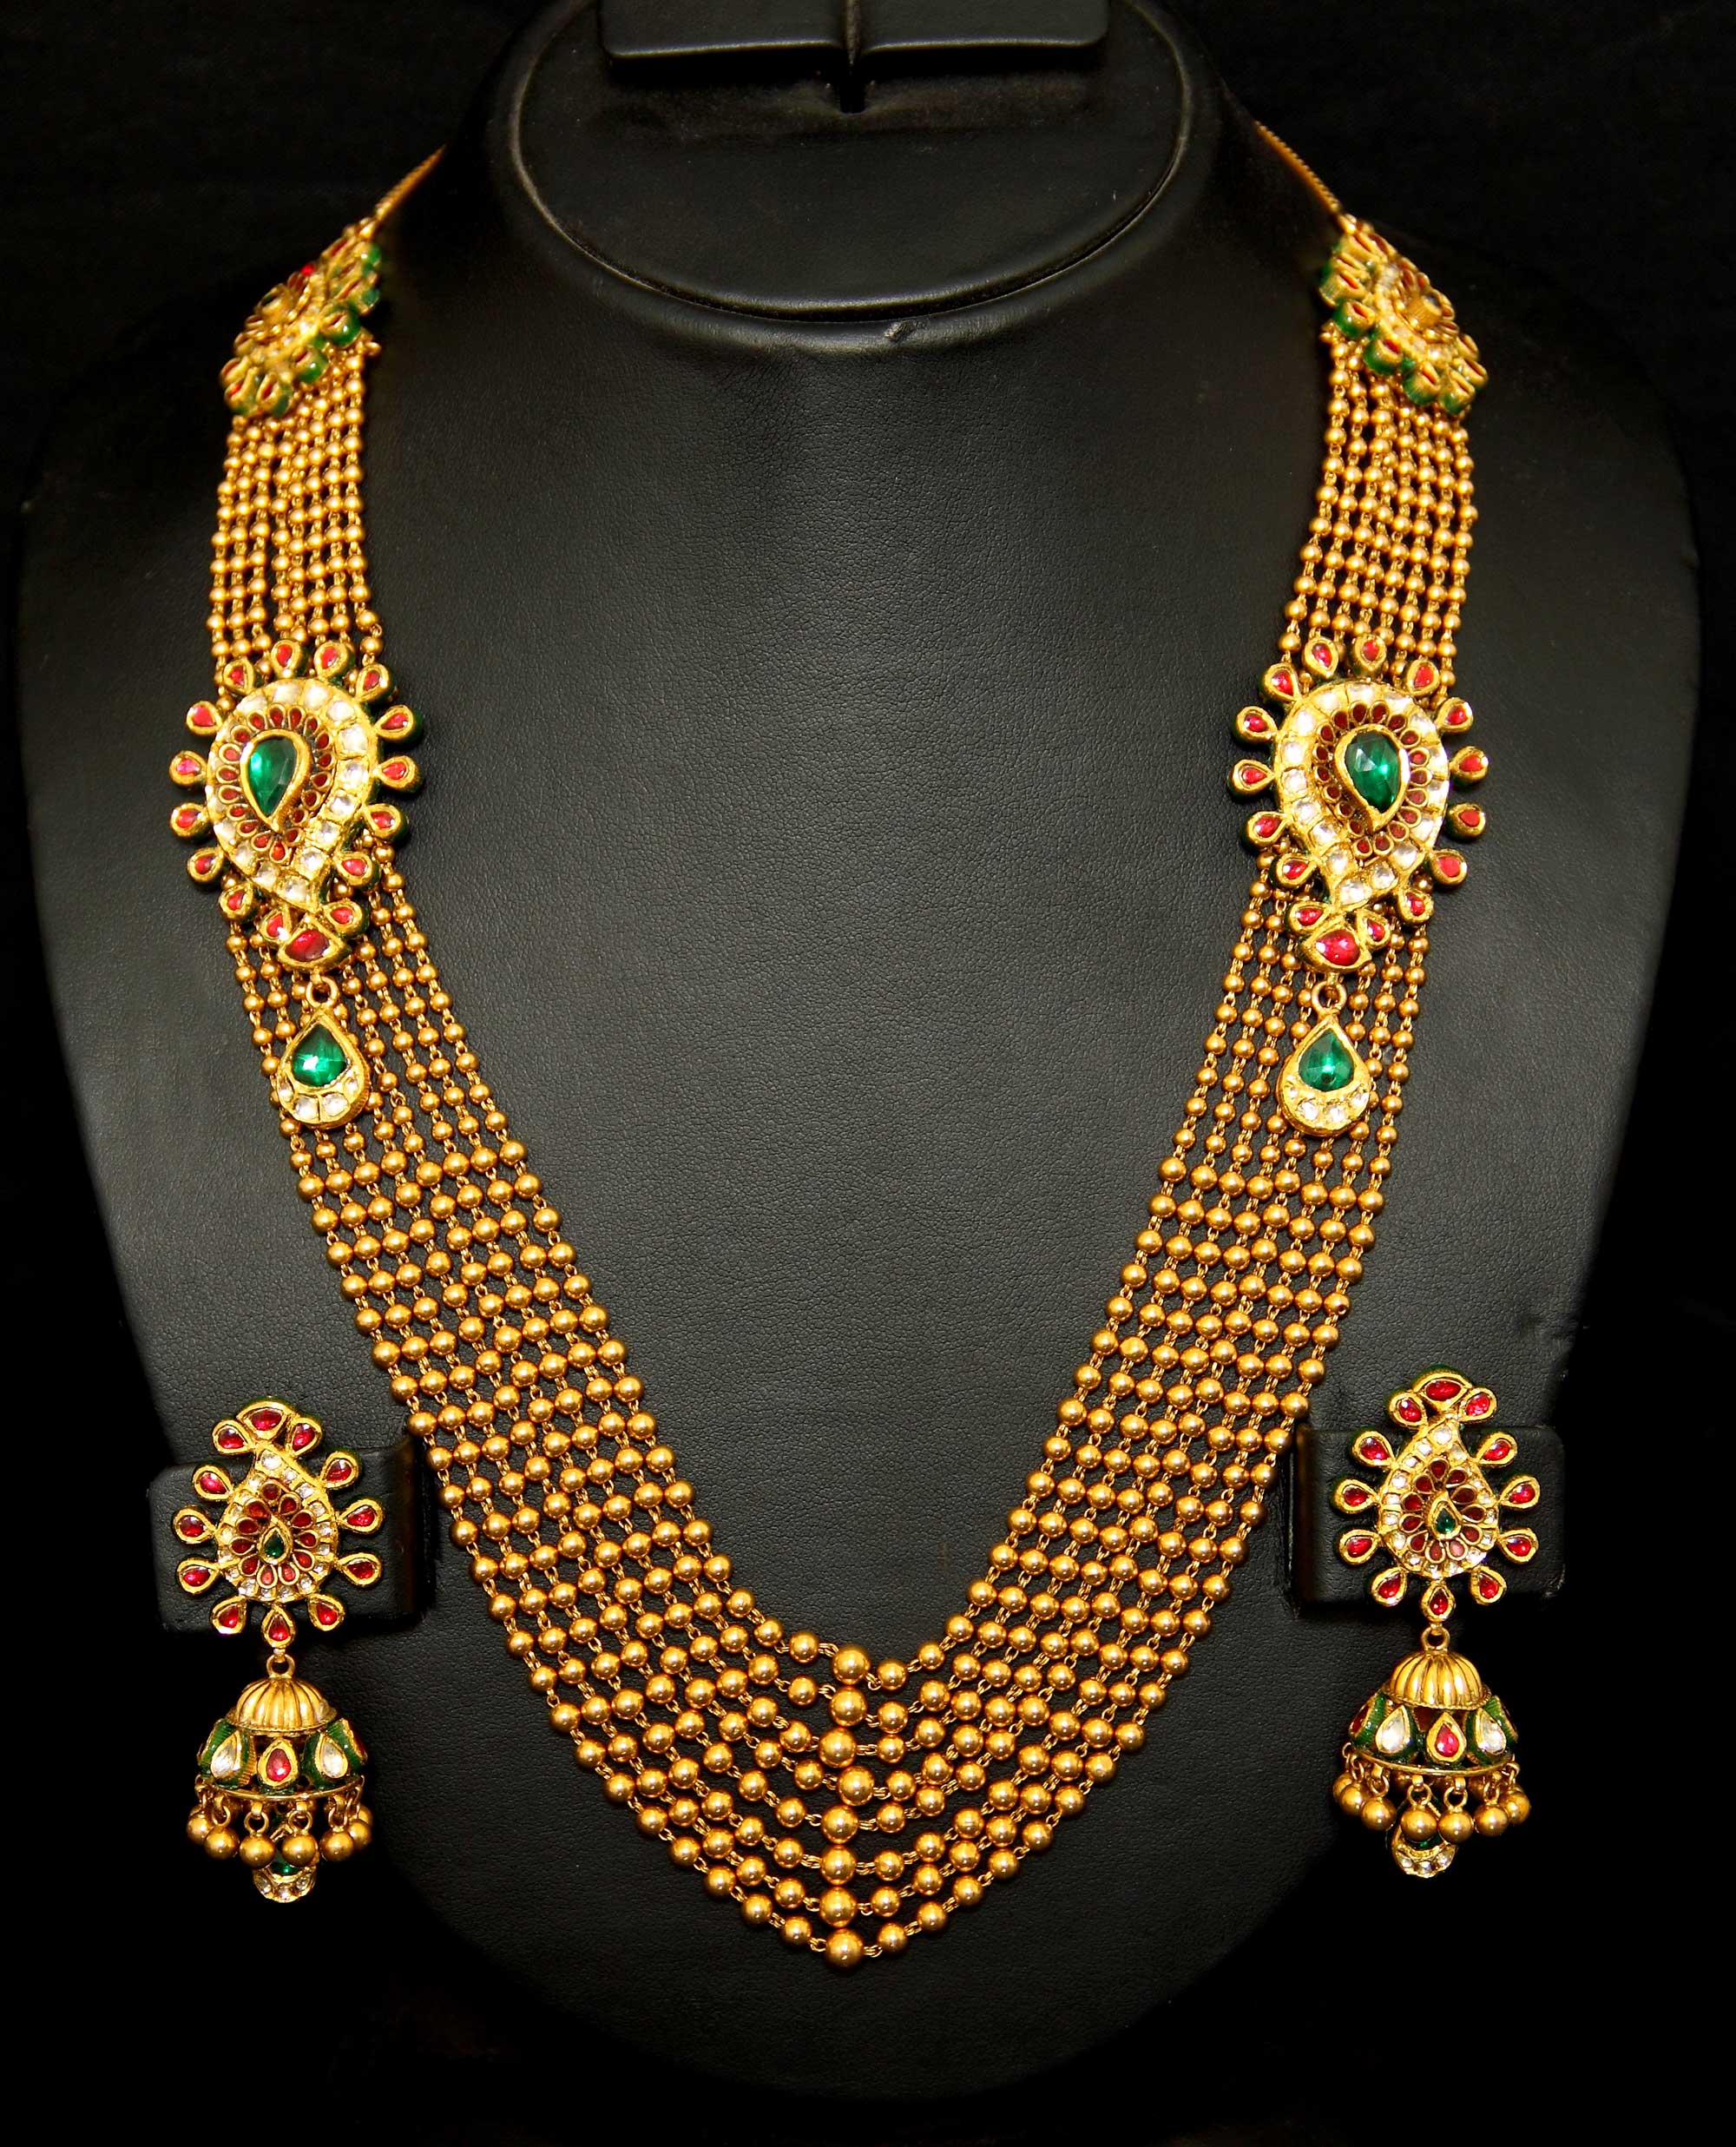 http://iystwowgold.com/wp-content/uploads/2015/11/indian-gold-jewelry-designs.jpg